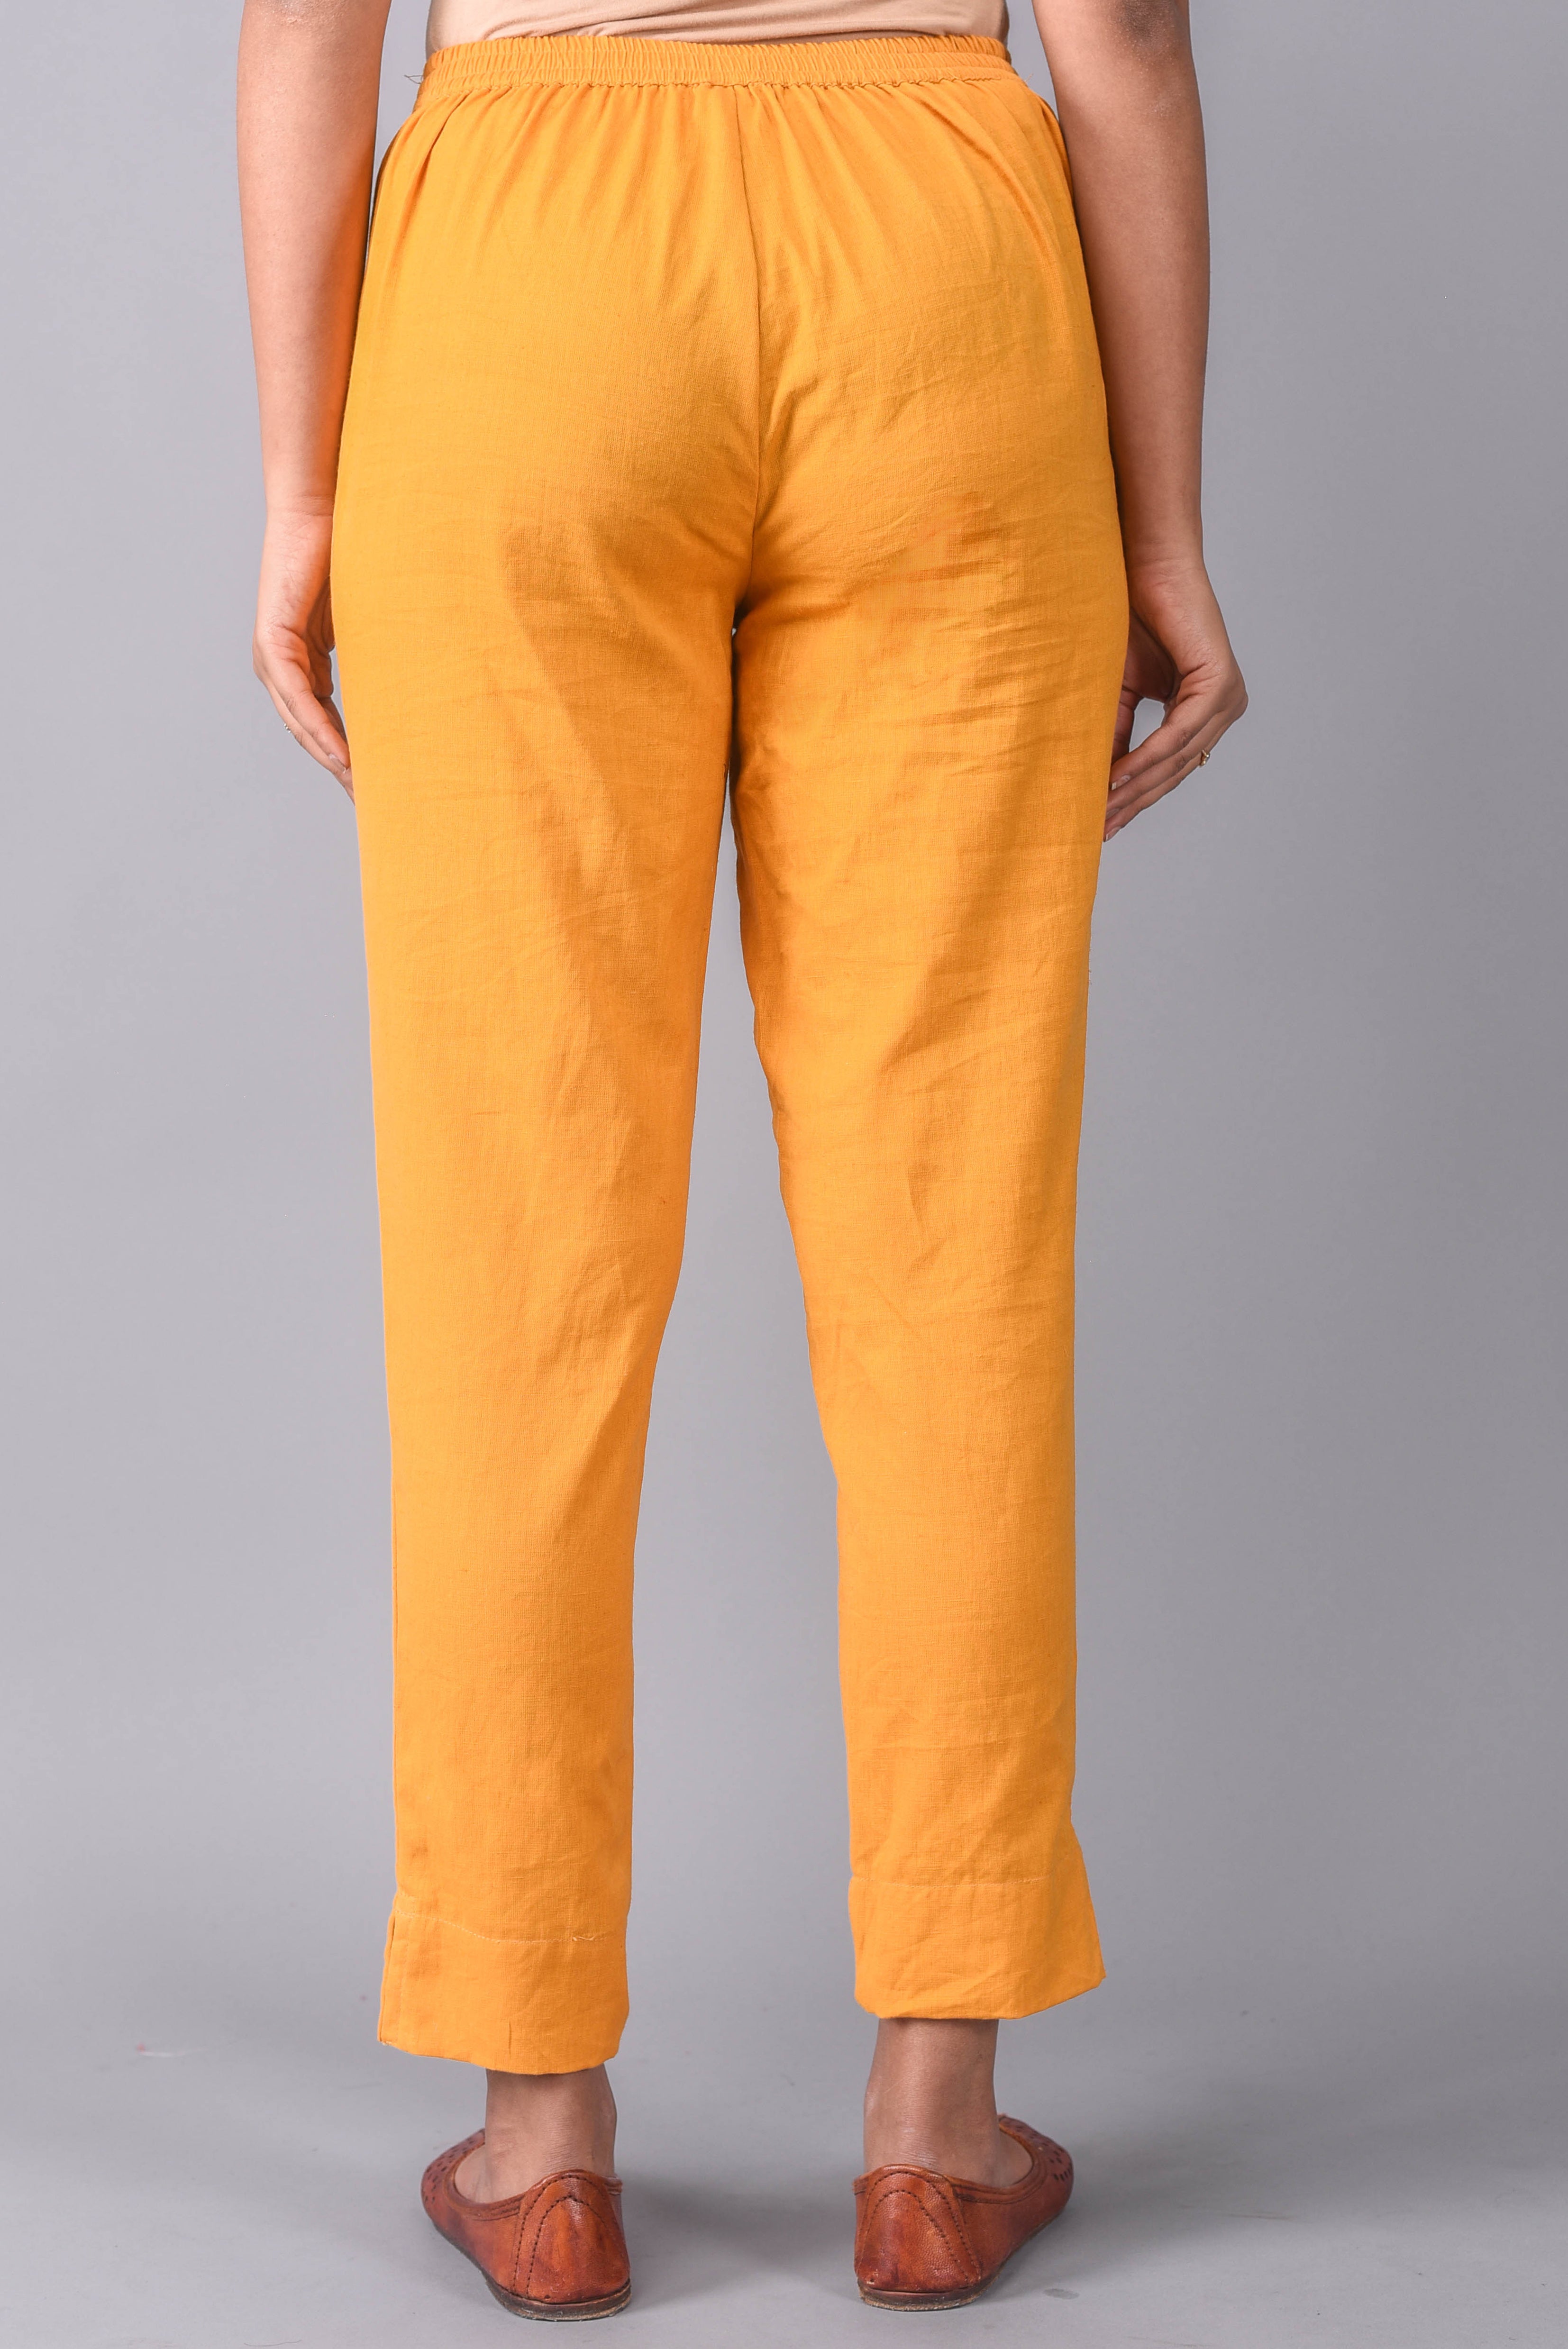 Cycle women's cigarette trousers